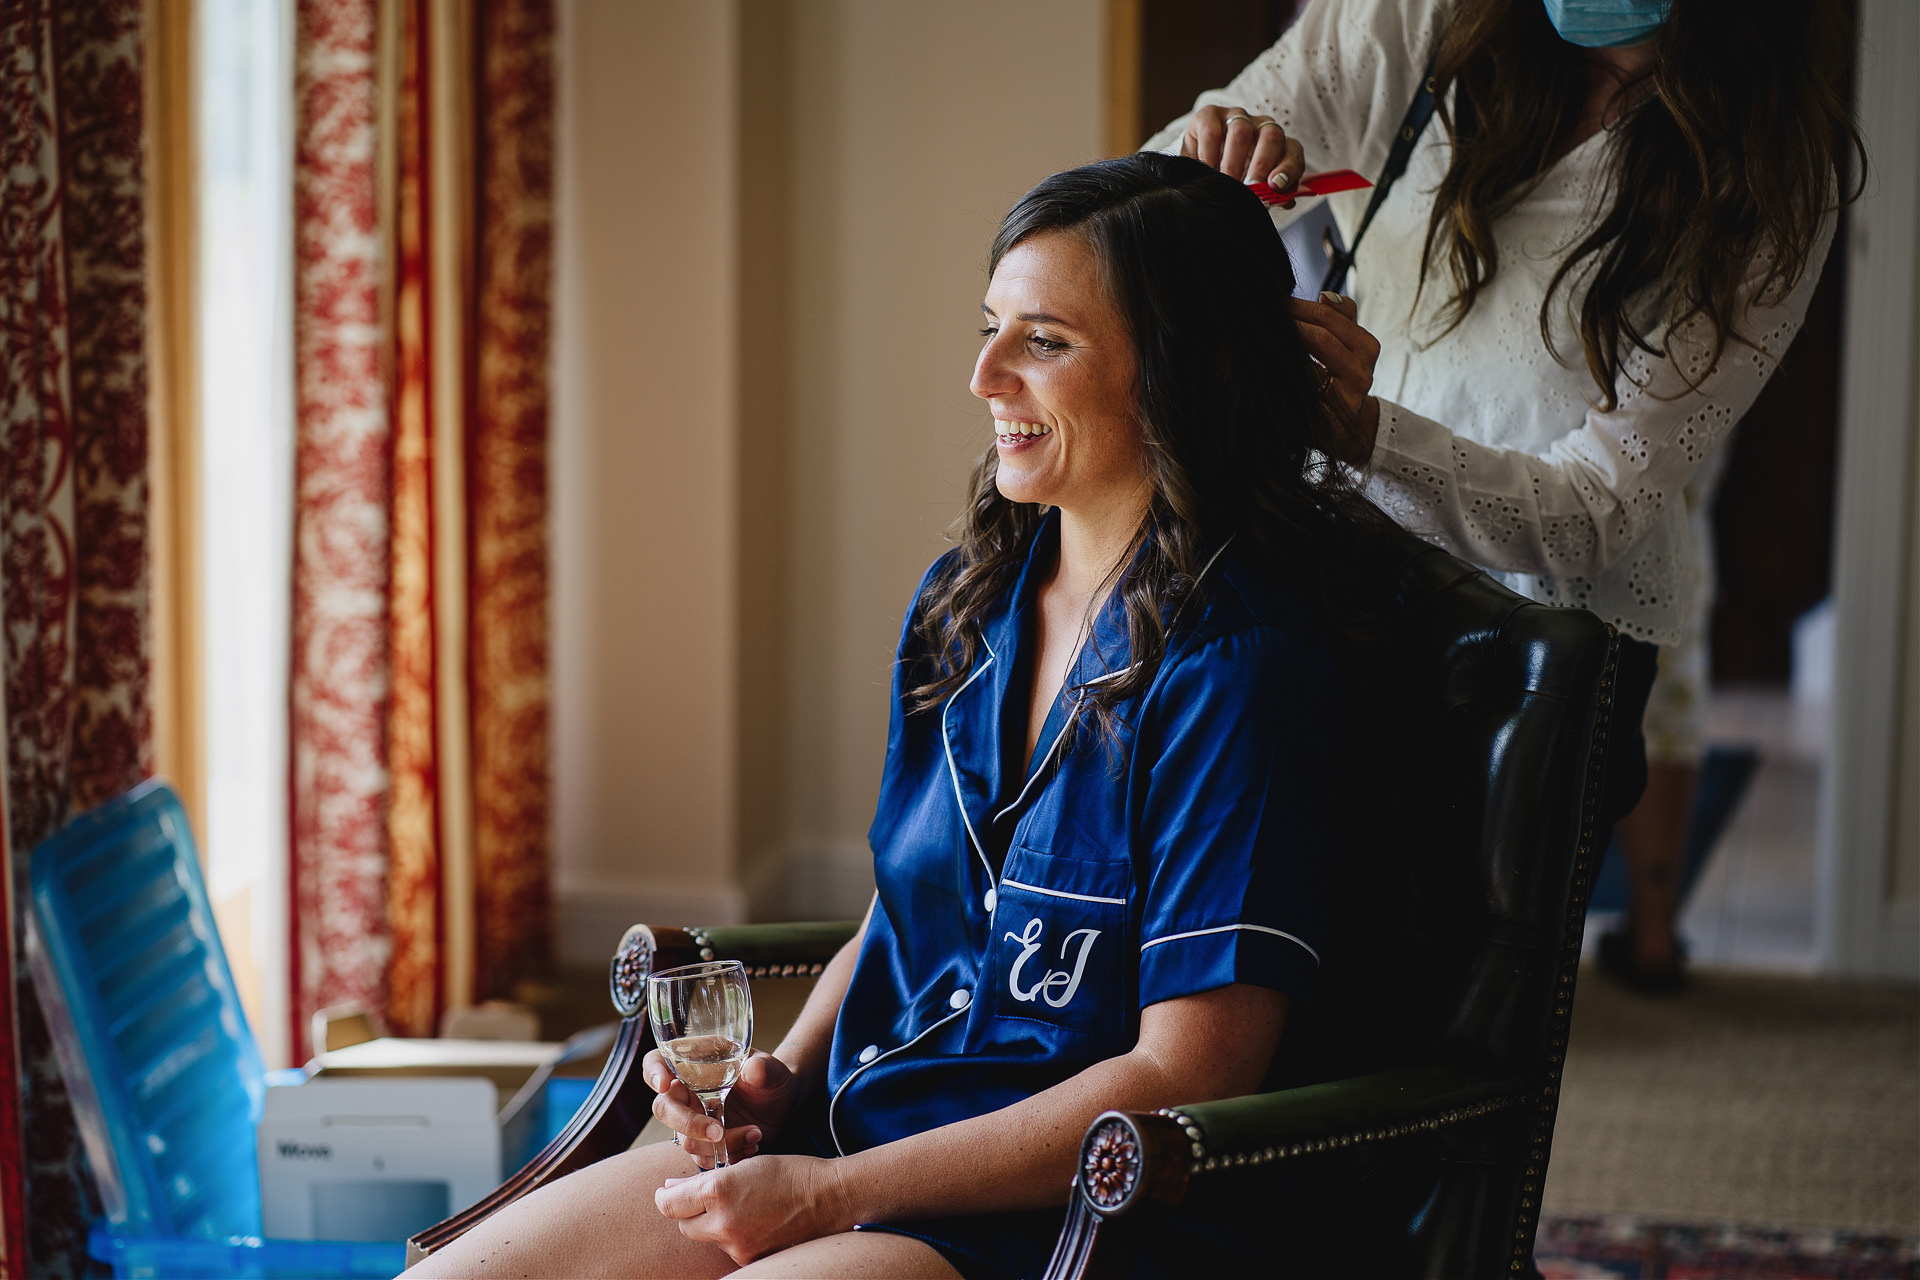 Bride to be having her hair and make up done and smiling with a glass in hand